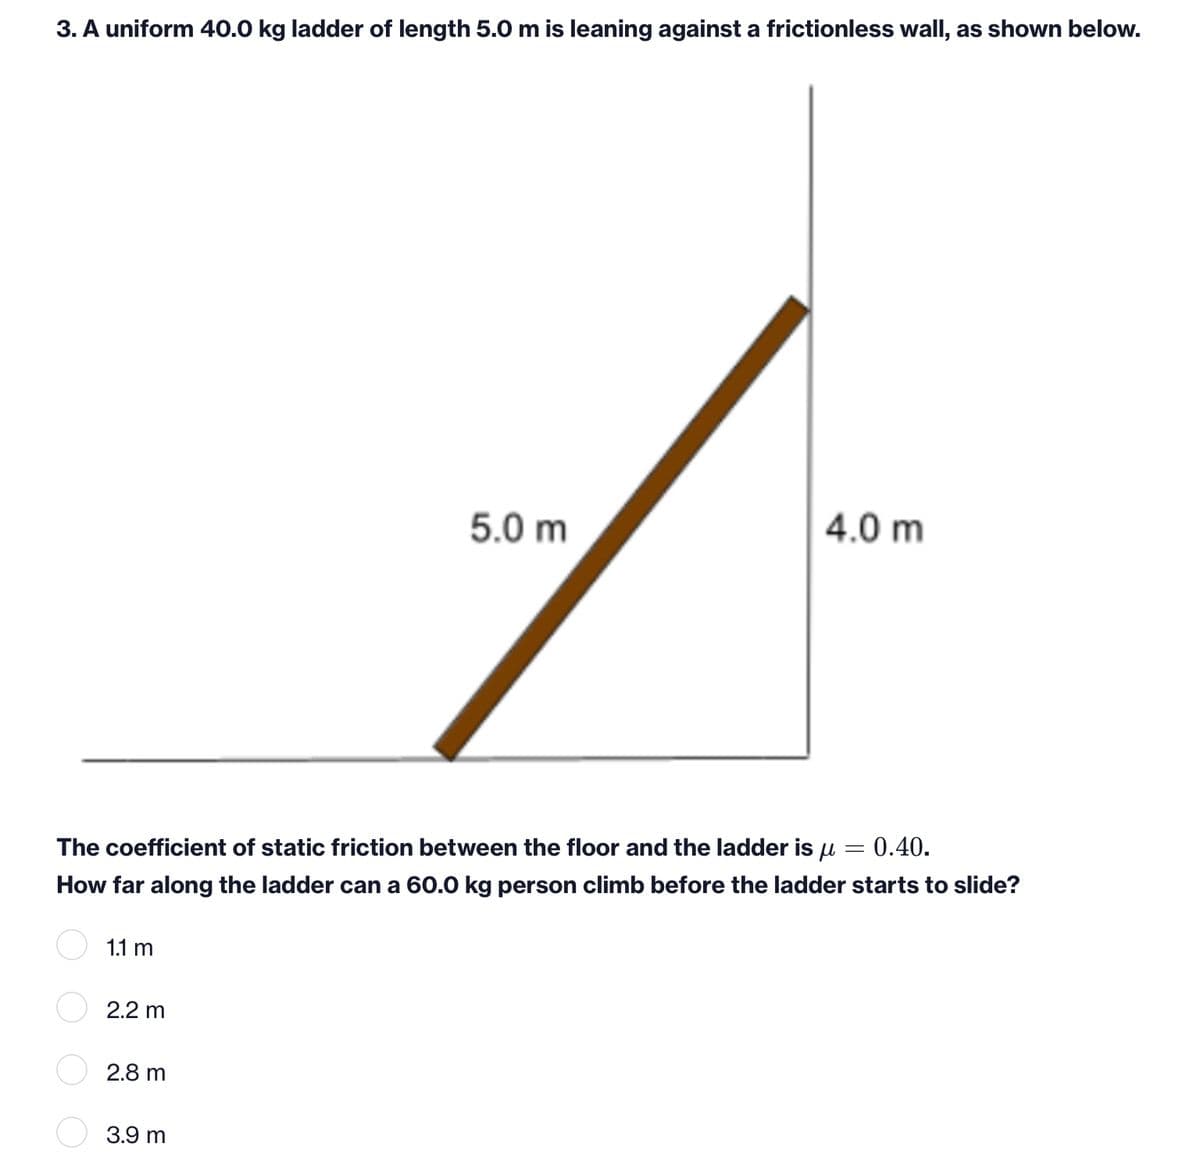 3. A uniform 40.0 kg ladder of length 5.0 m is leaning against a frictionless wall, as shown below.
5.0 m
4.0 m
The coefficient of static friction between the floor and the ladder is u
0.40.
How far along the ladder can a 60.0 kg person climb before the ladder starts to slide?
1.1 m
2.2 m
2.8 m
3.9 m
